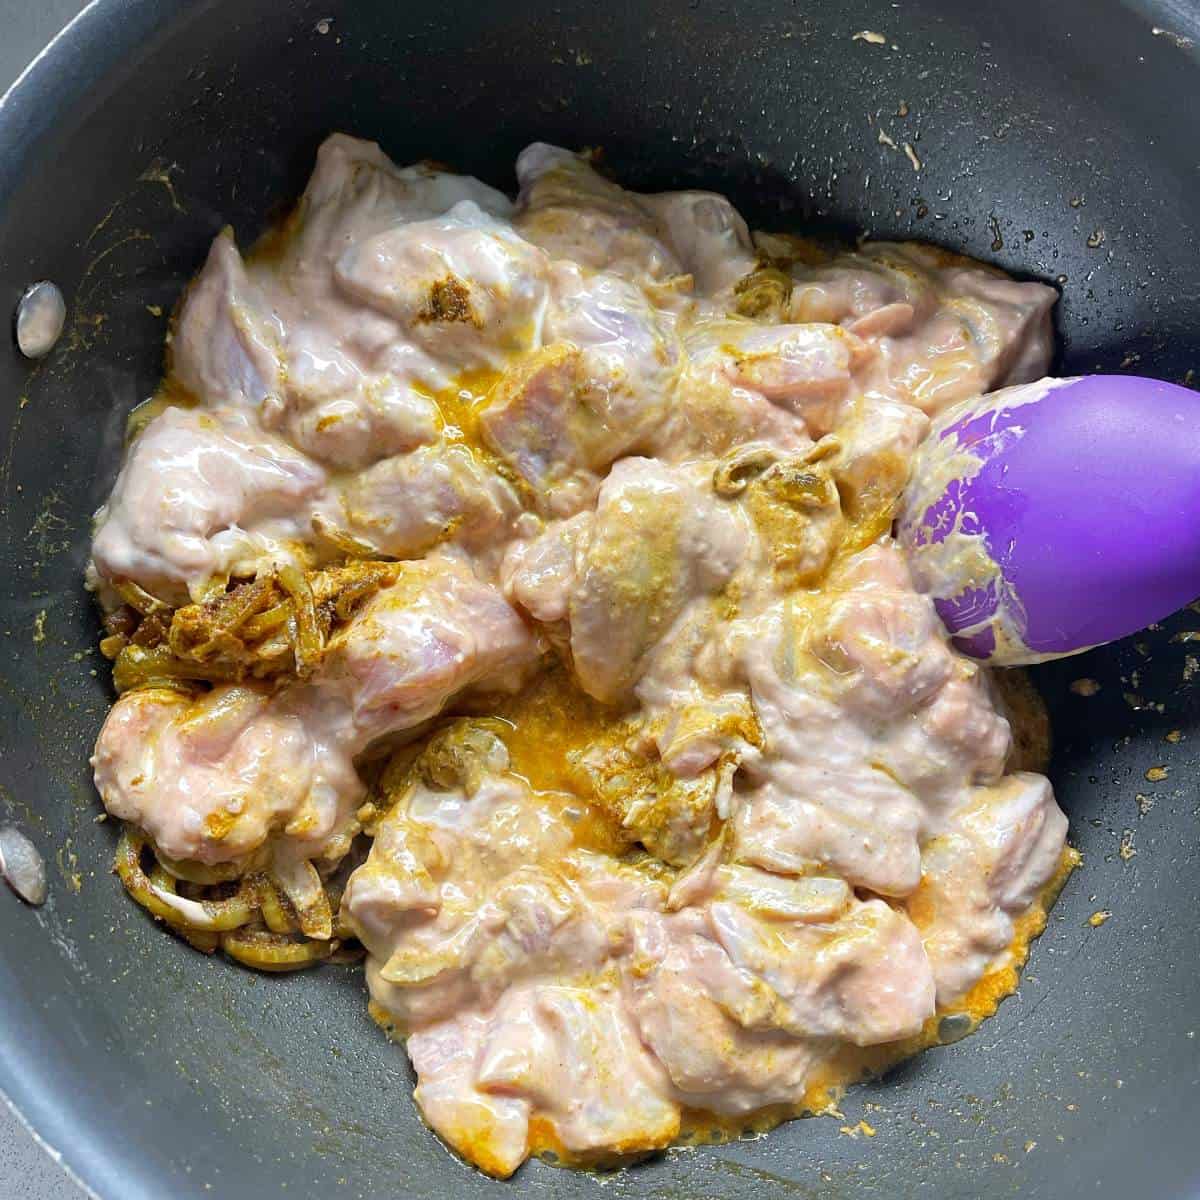 Marinated chicken frying in a pan.